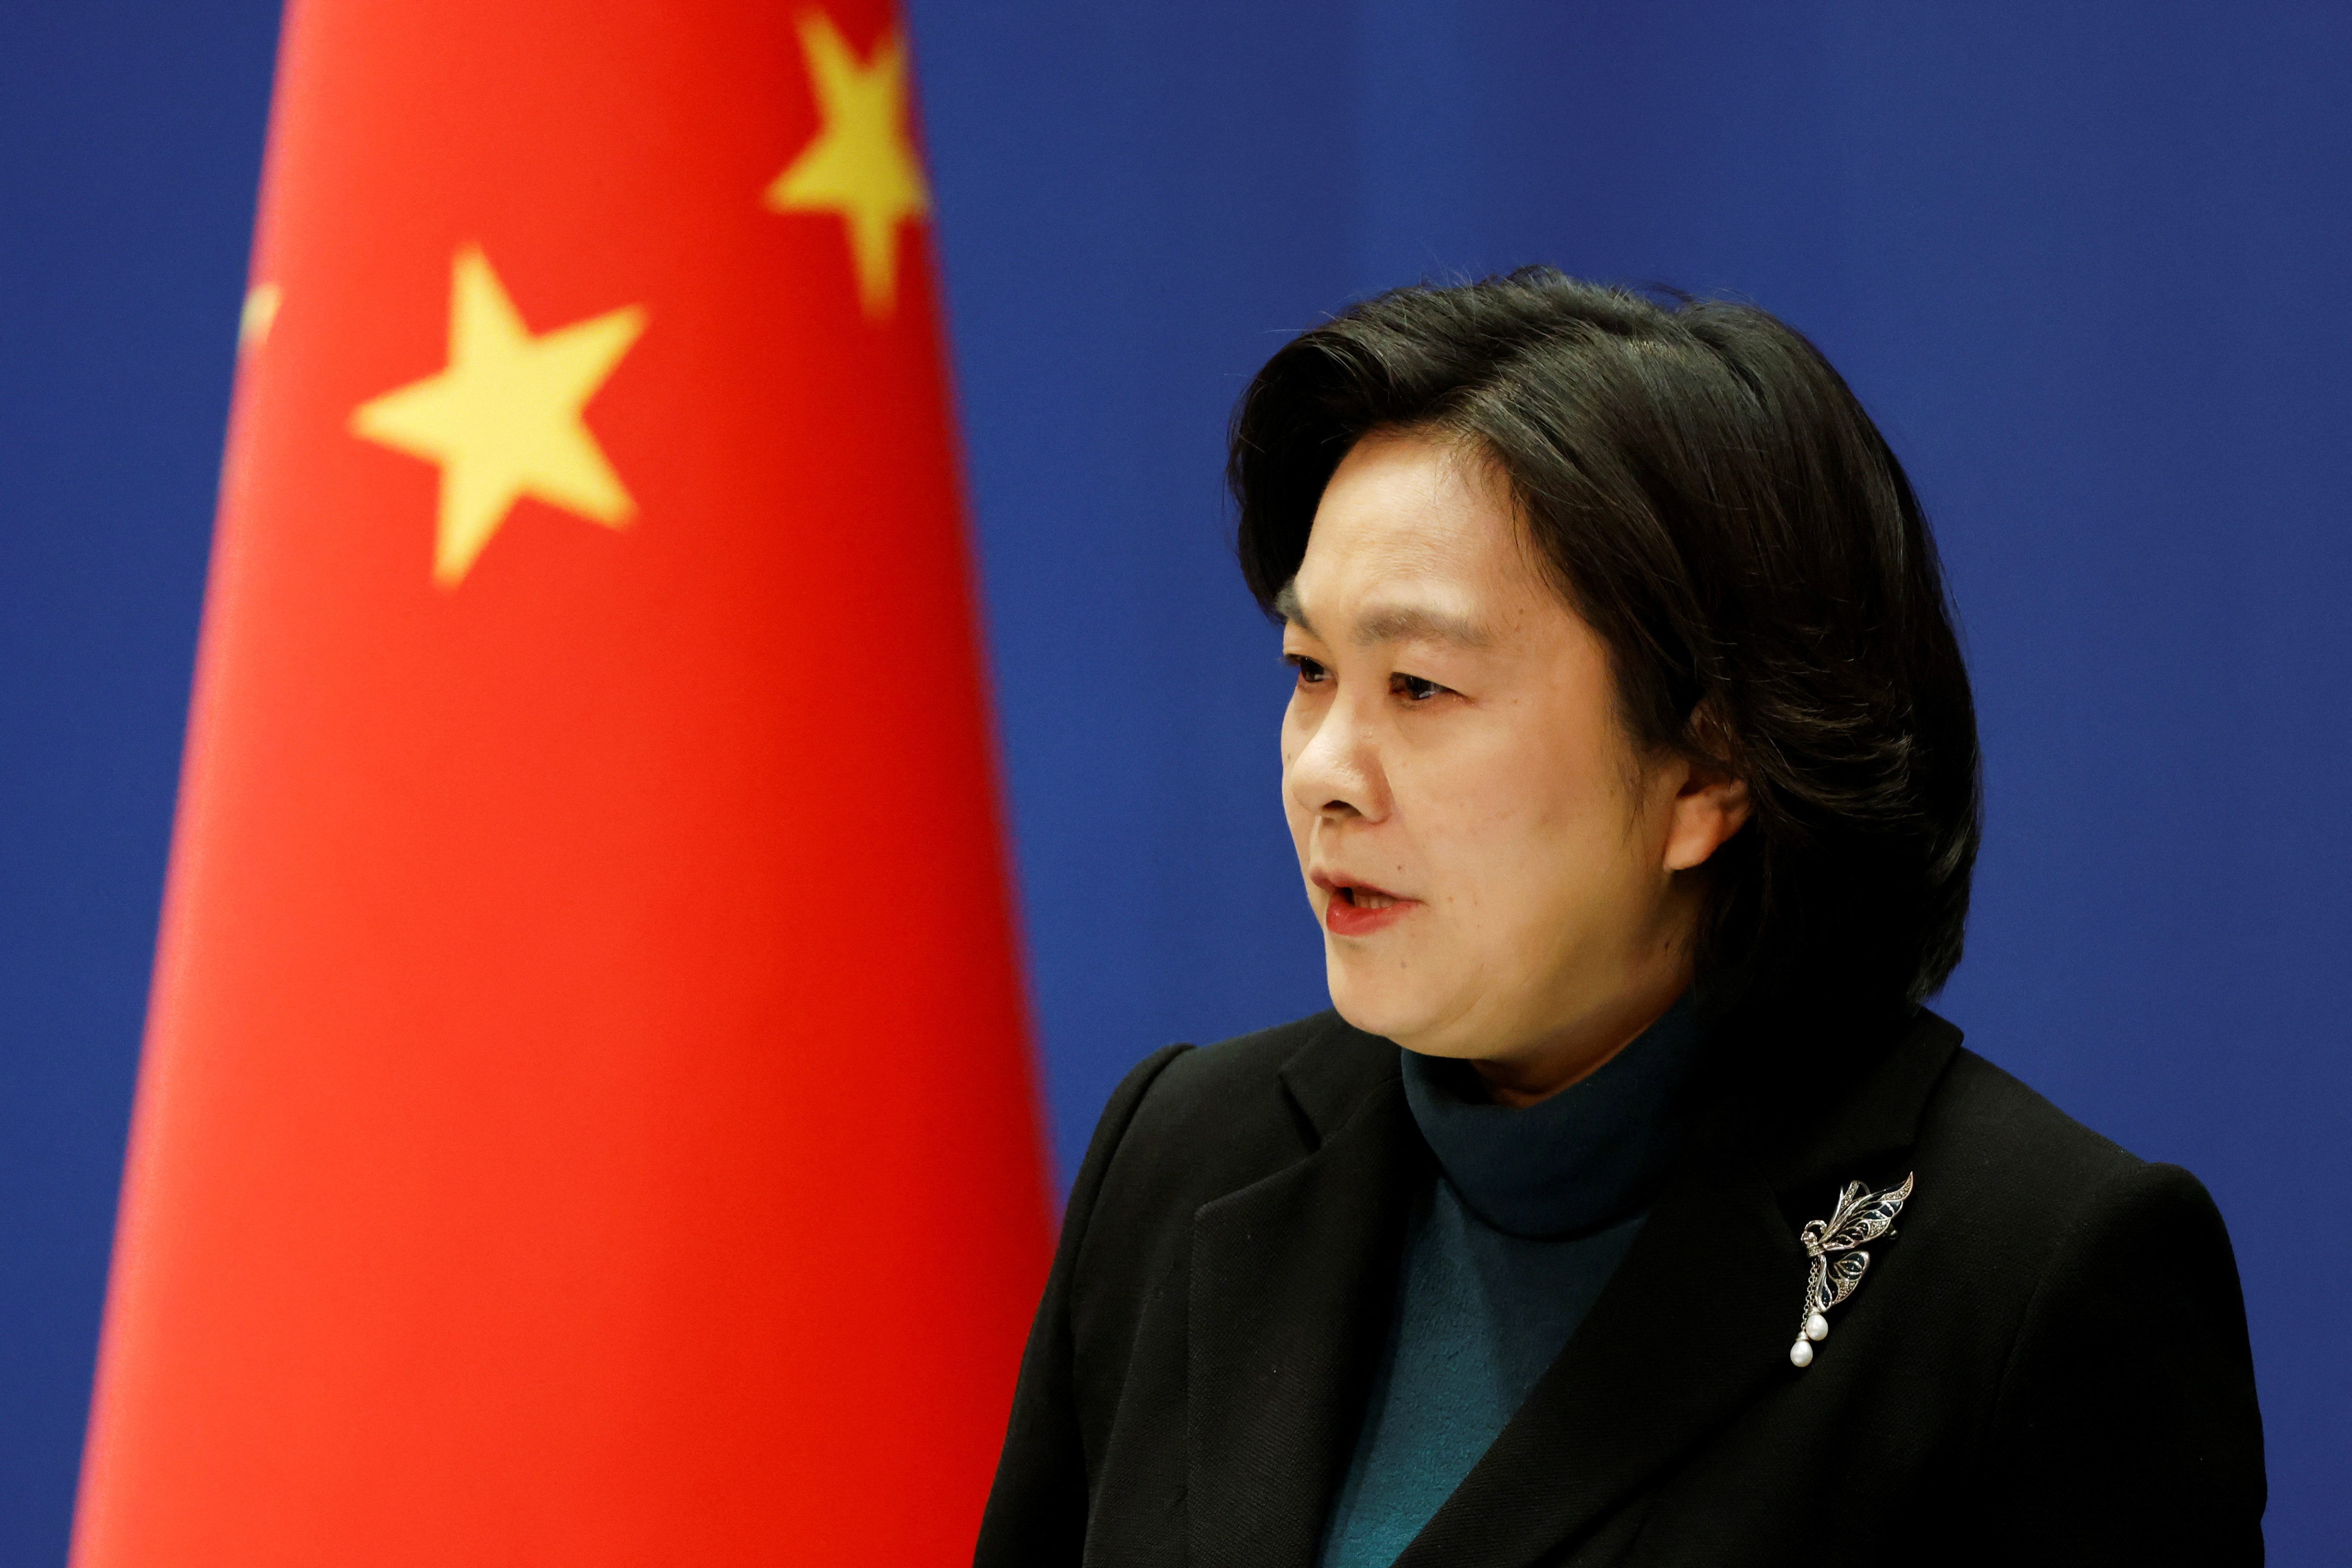 Chinese Foreign Ministry spokesperson Hua Chunying attends a news conference in Beijing